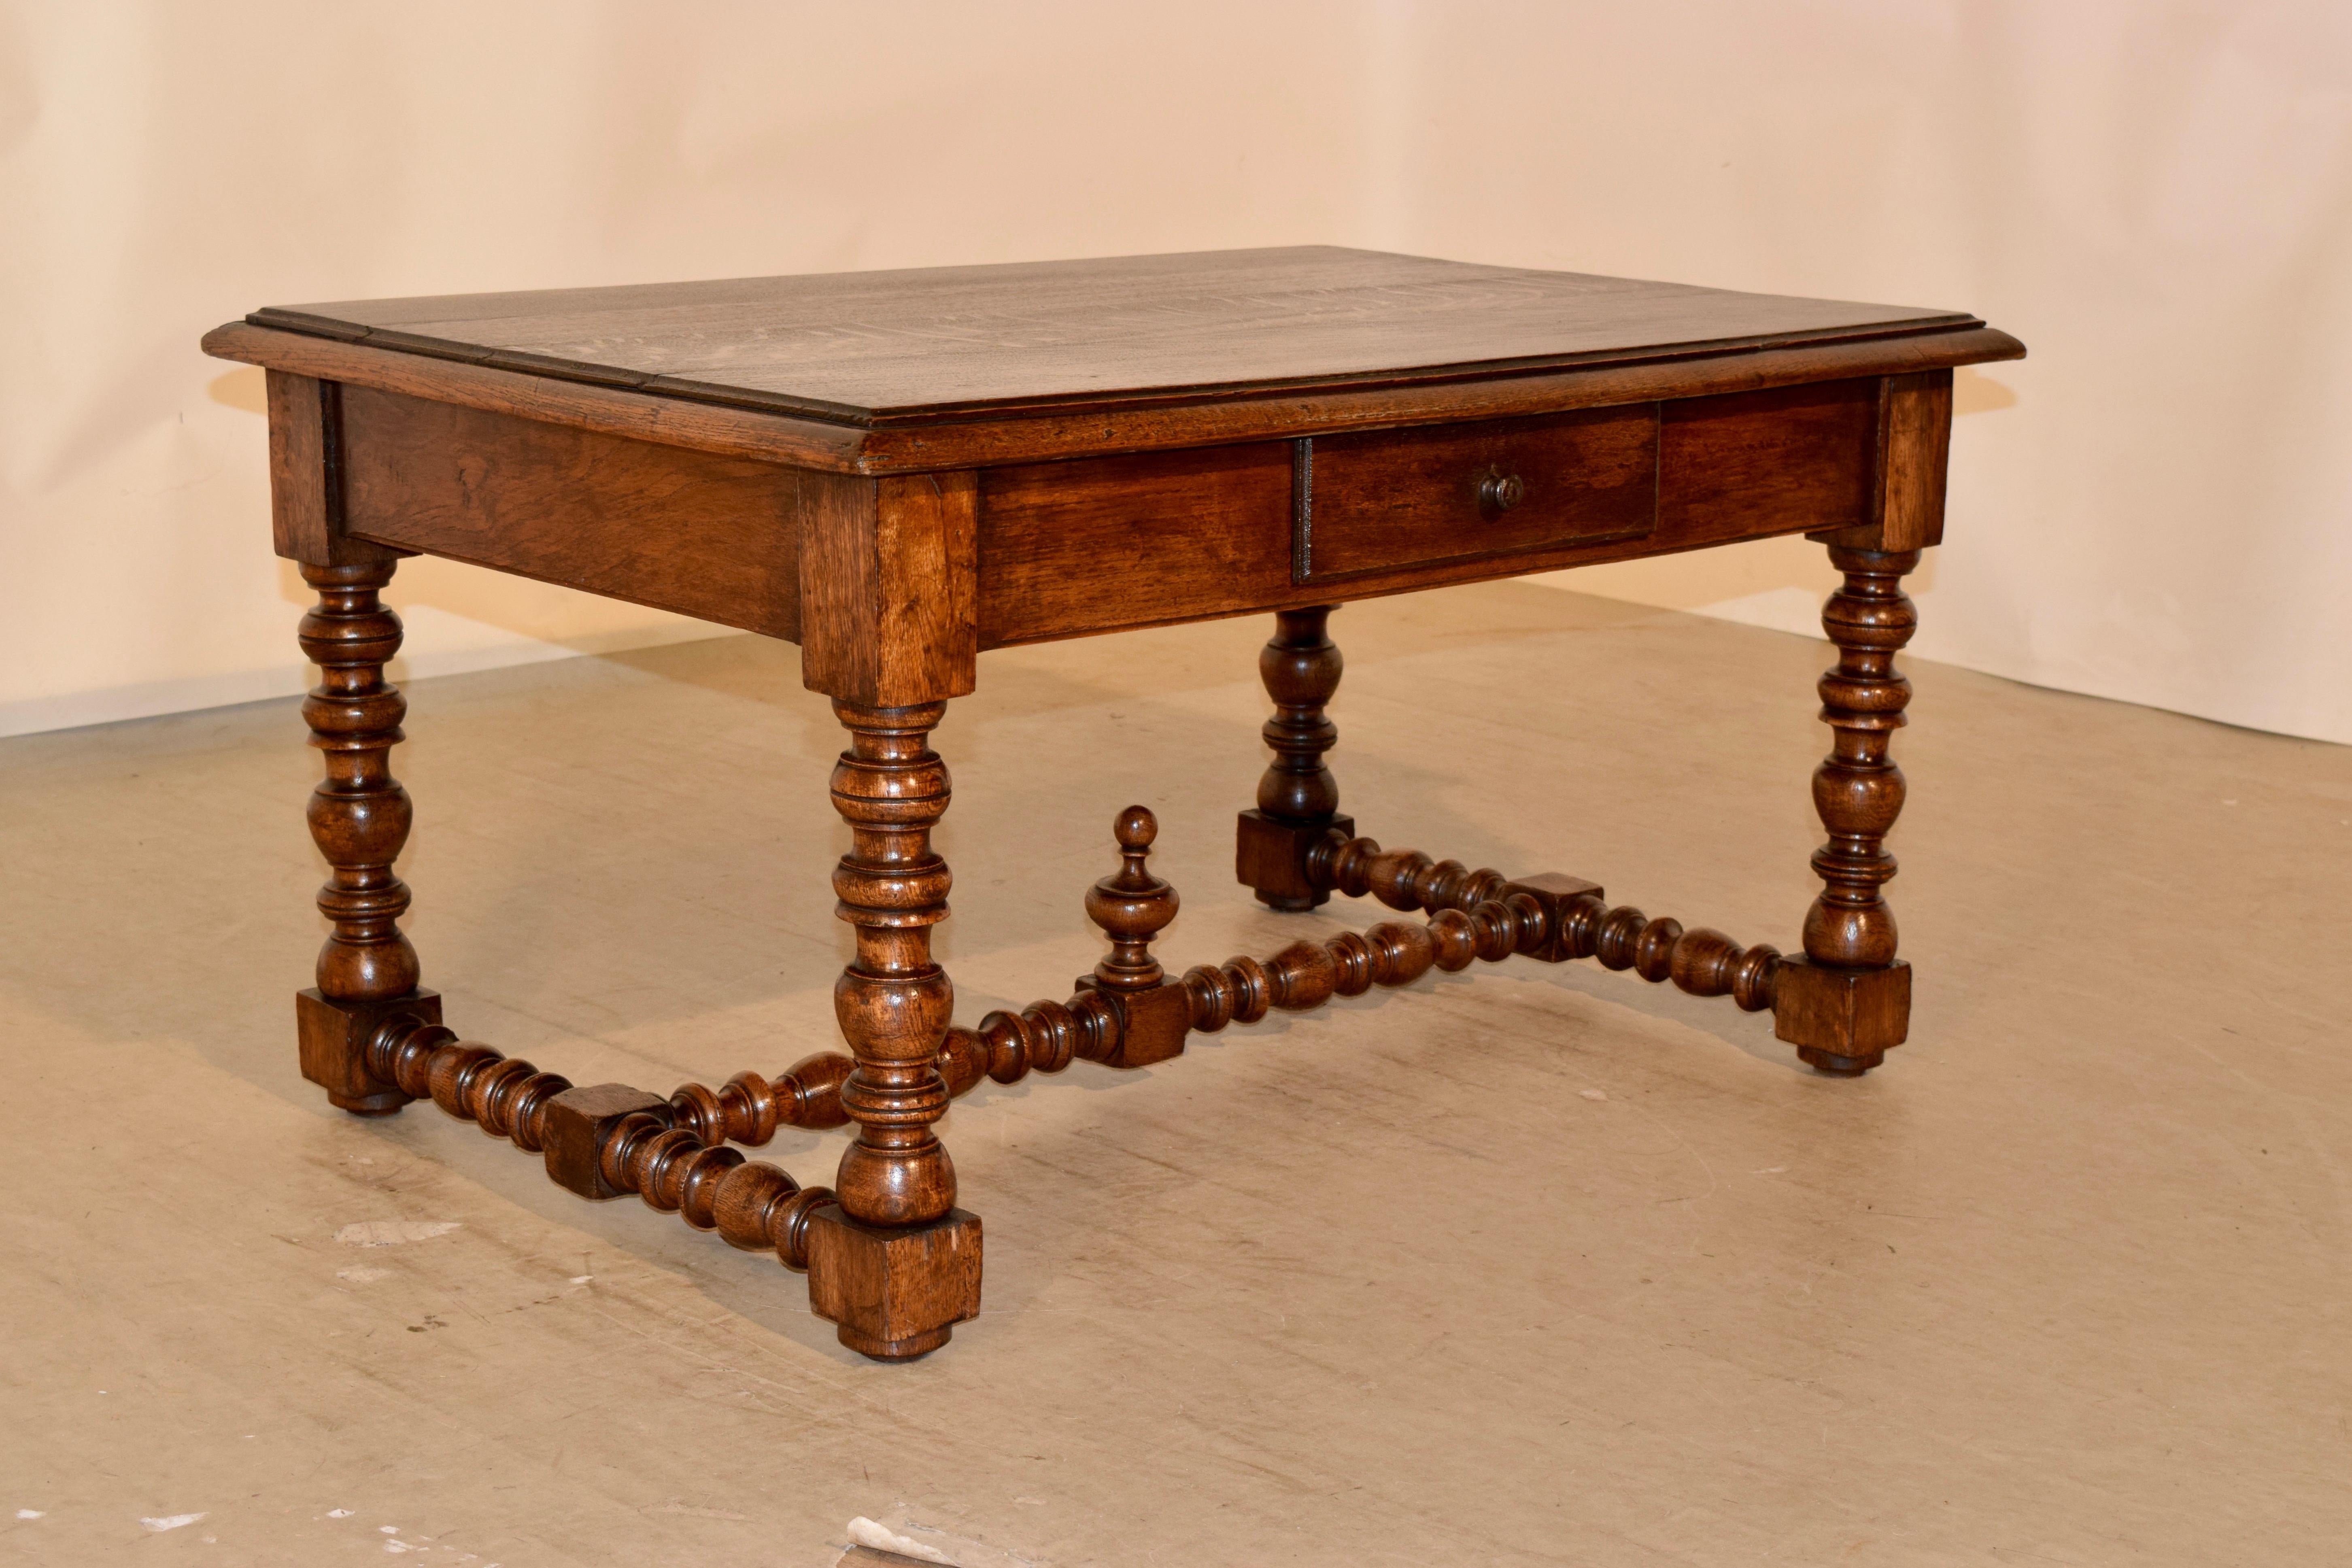 19th century French coffee table made from oak. The top has a molded and beveled edge, following down to a simple apron containing a single drawer. The table is supported on lovely hand turned legs which are joined by turned stretchers, and finished